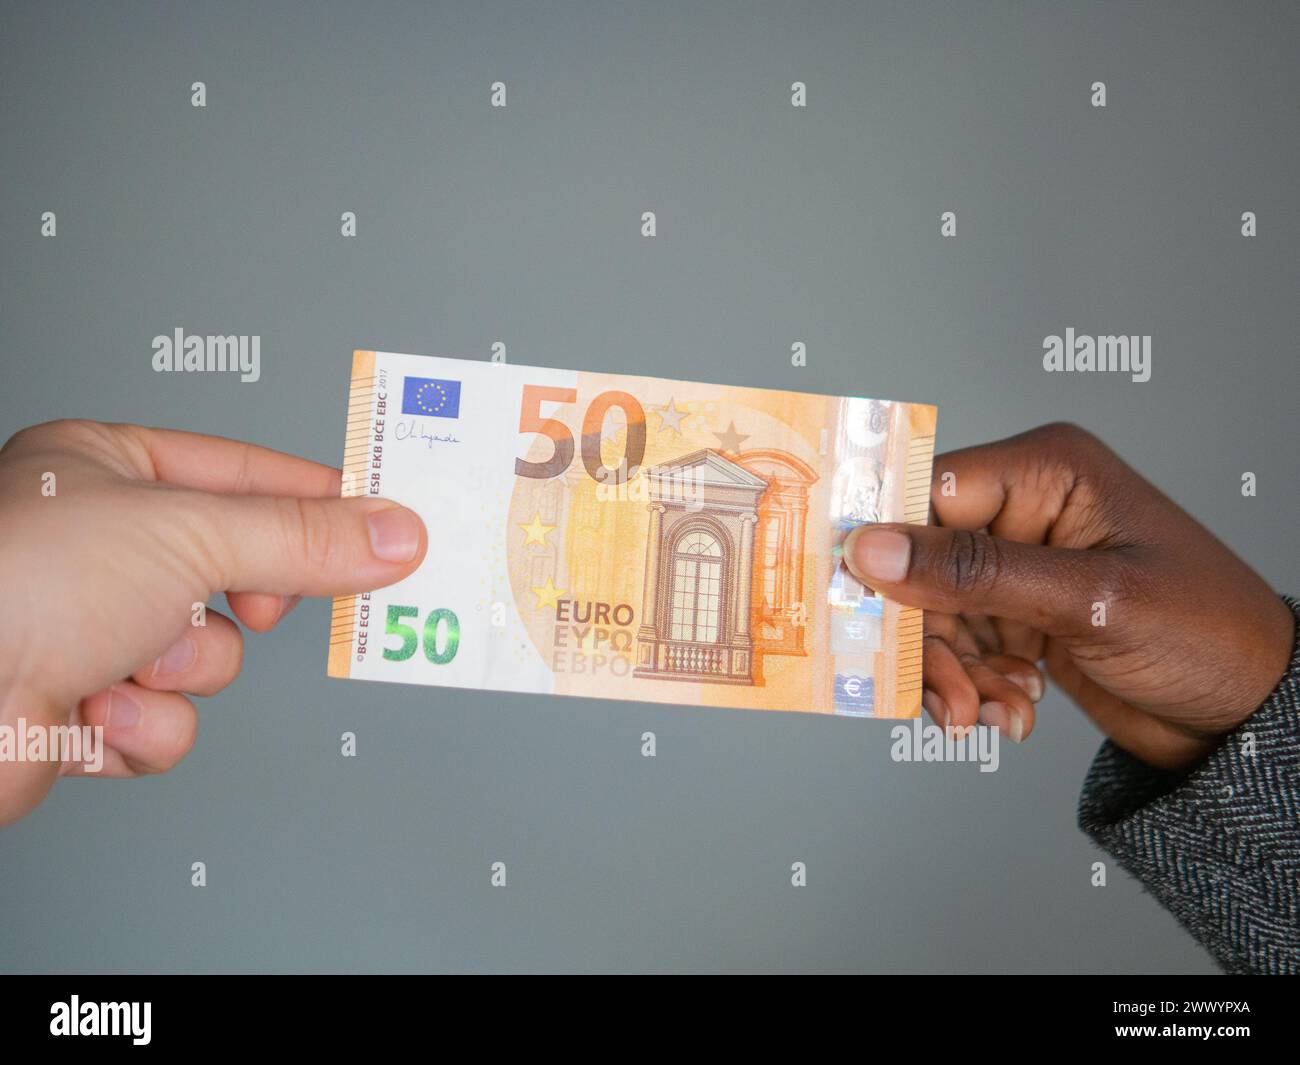 Two hands holding a fifty euro note Stock Photo